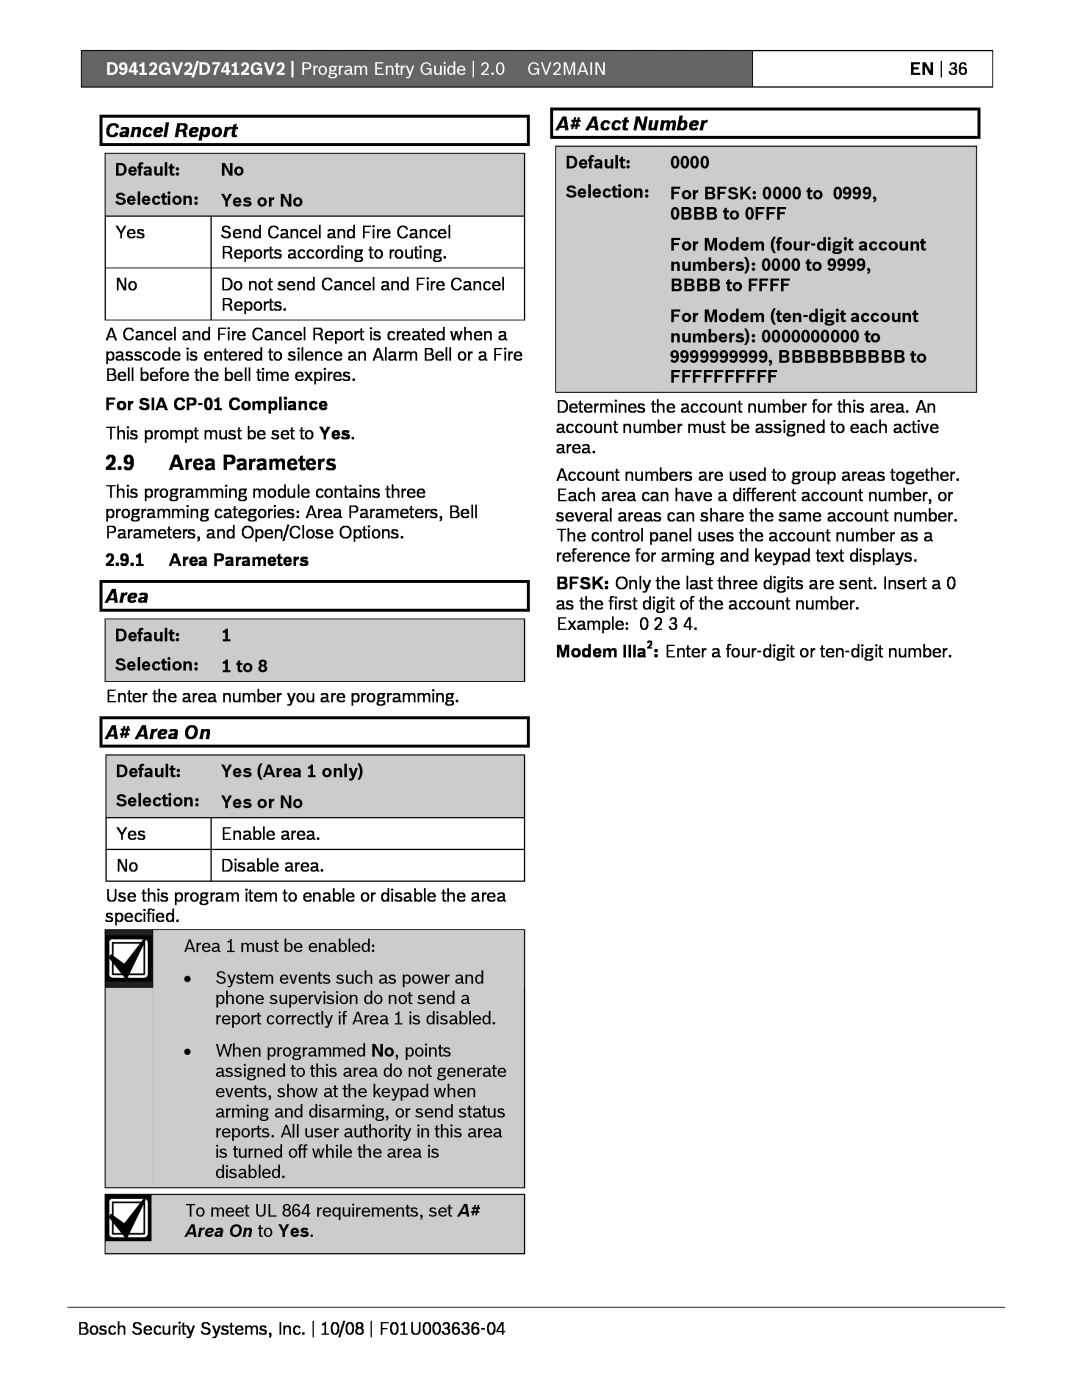 Bosch Appliances D9412GV2 manual 2.9Area Parameters, Cancel Report, A# Area On, A# Acct Number, Area On to Yes 